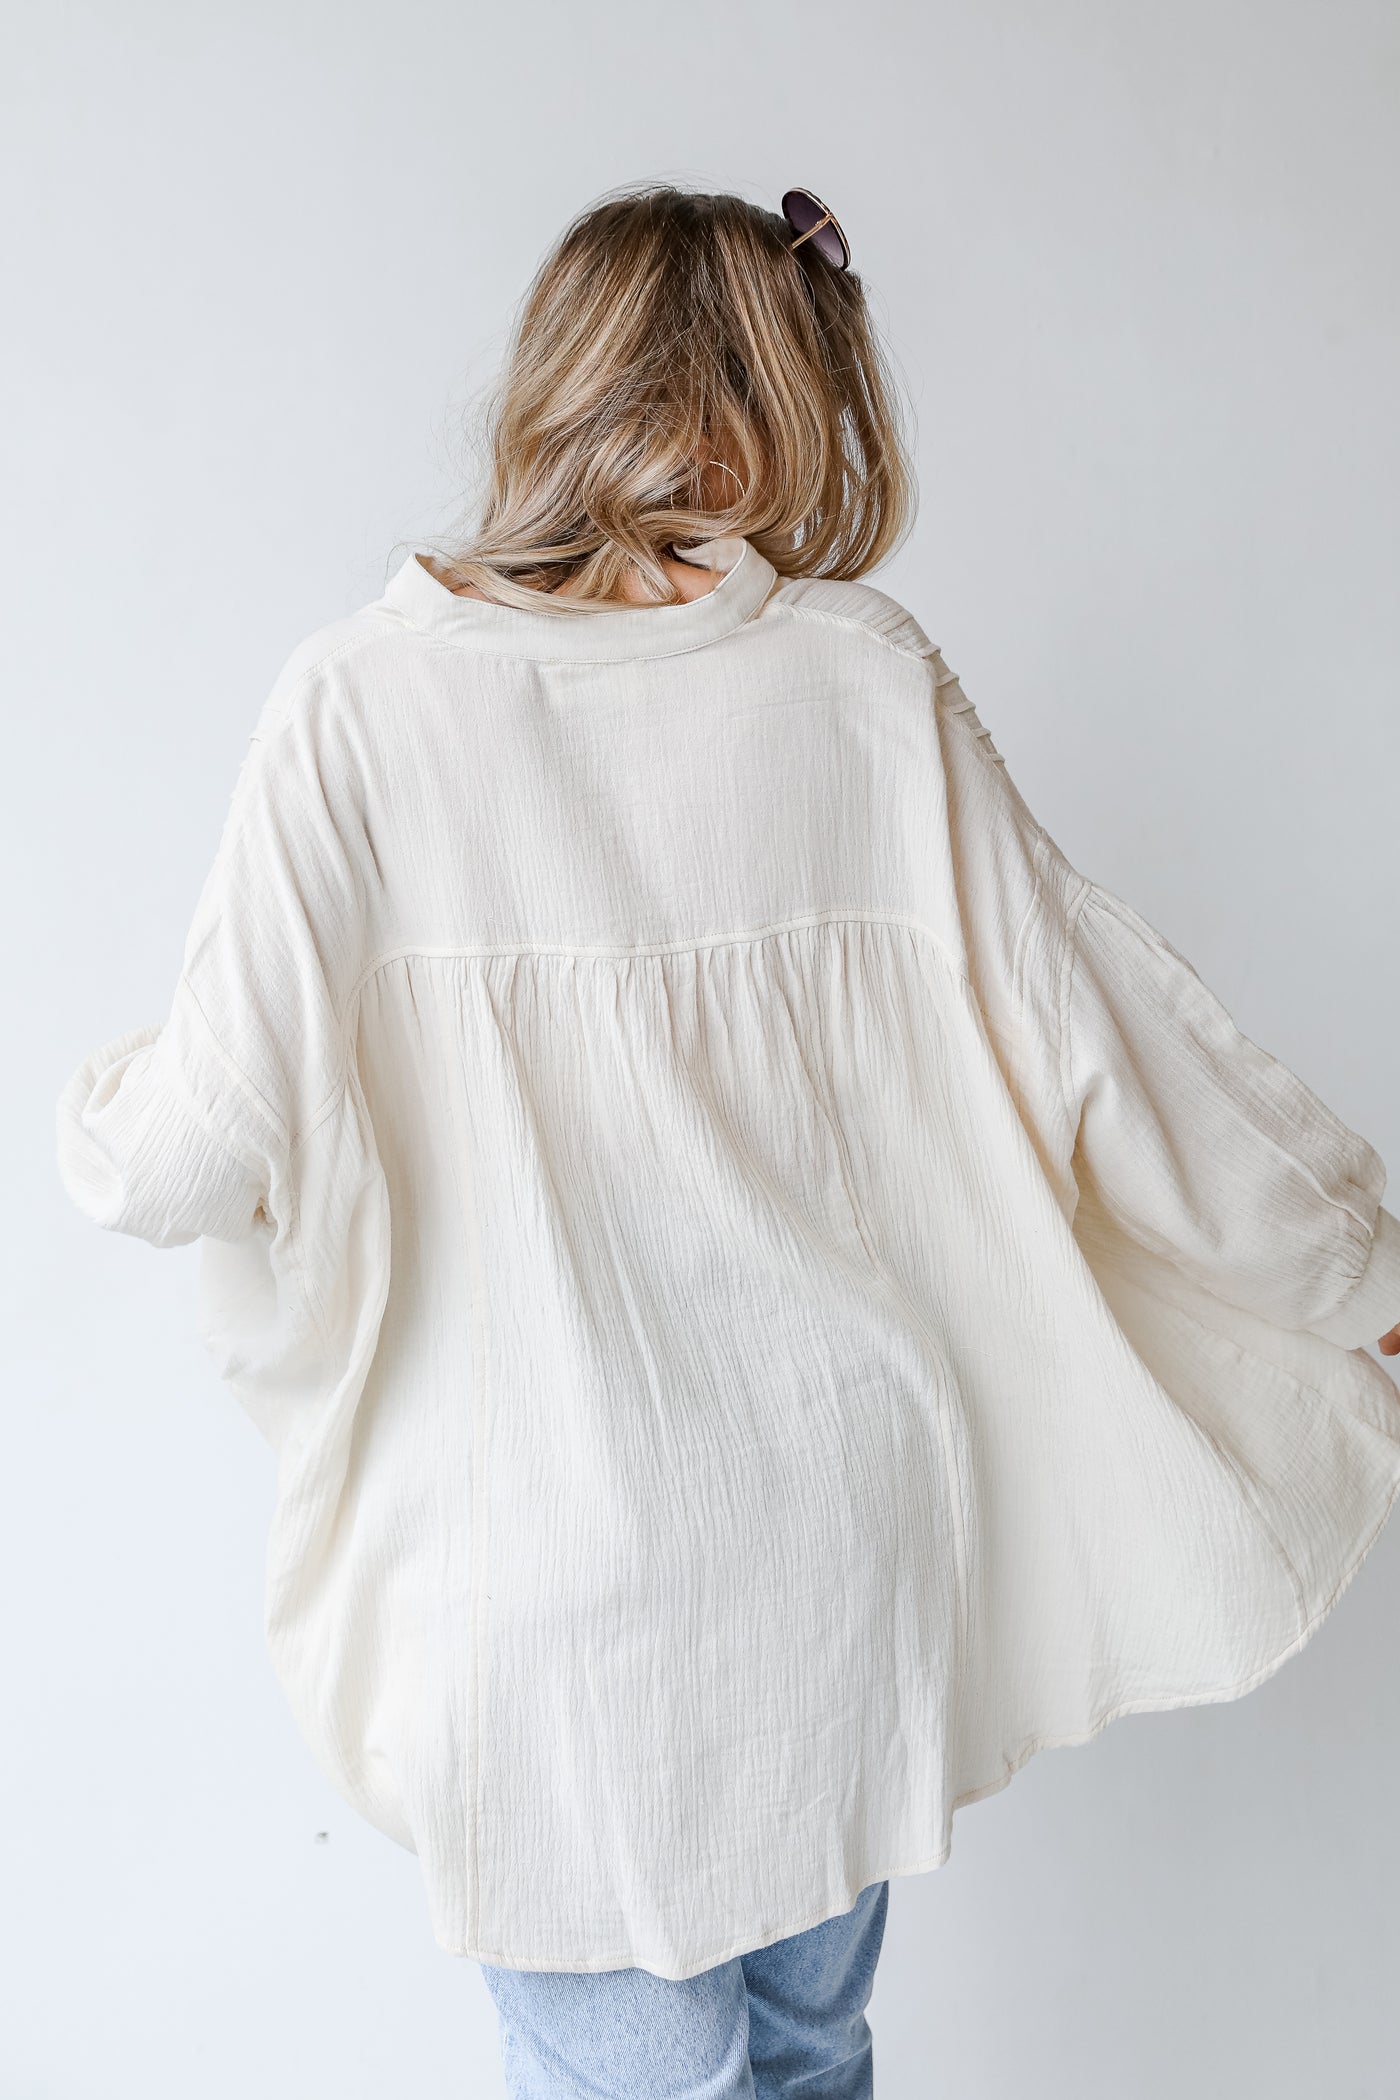 Oversized Linen Tunic in ivory back view